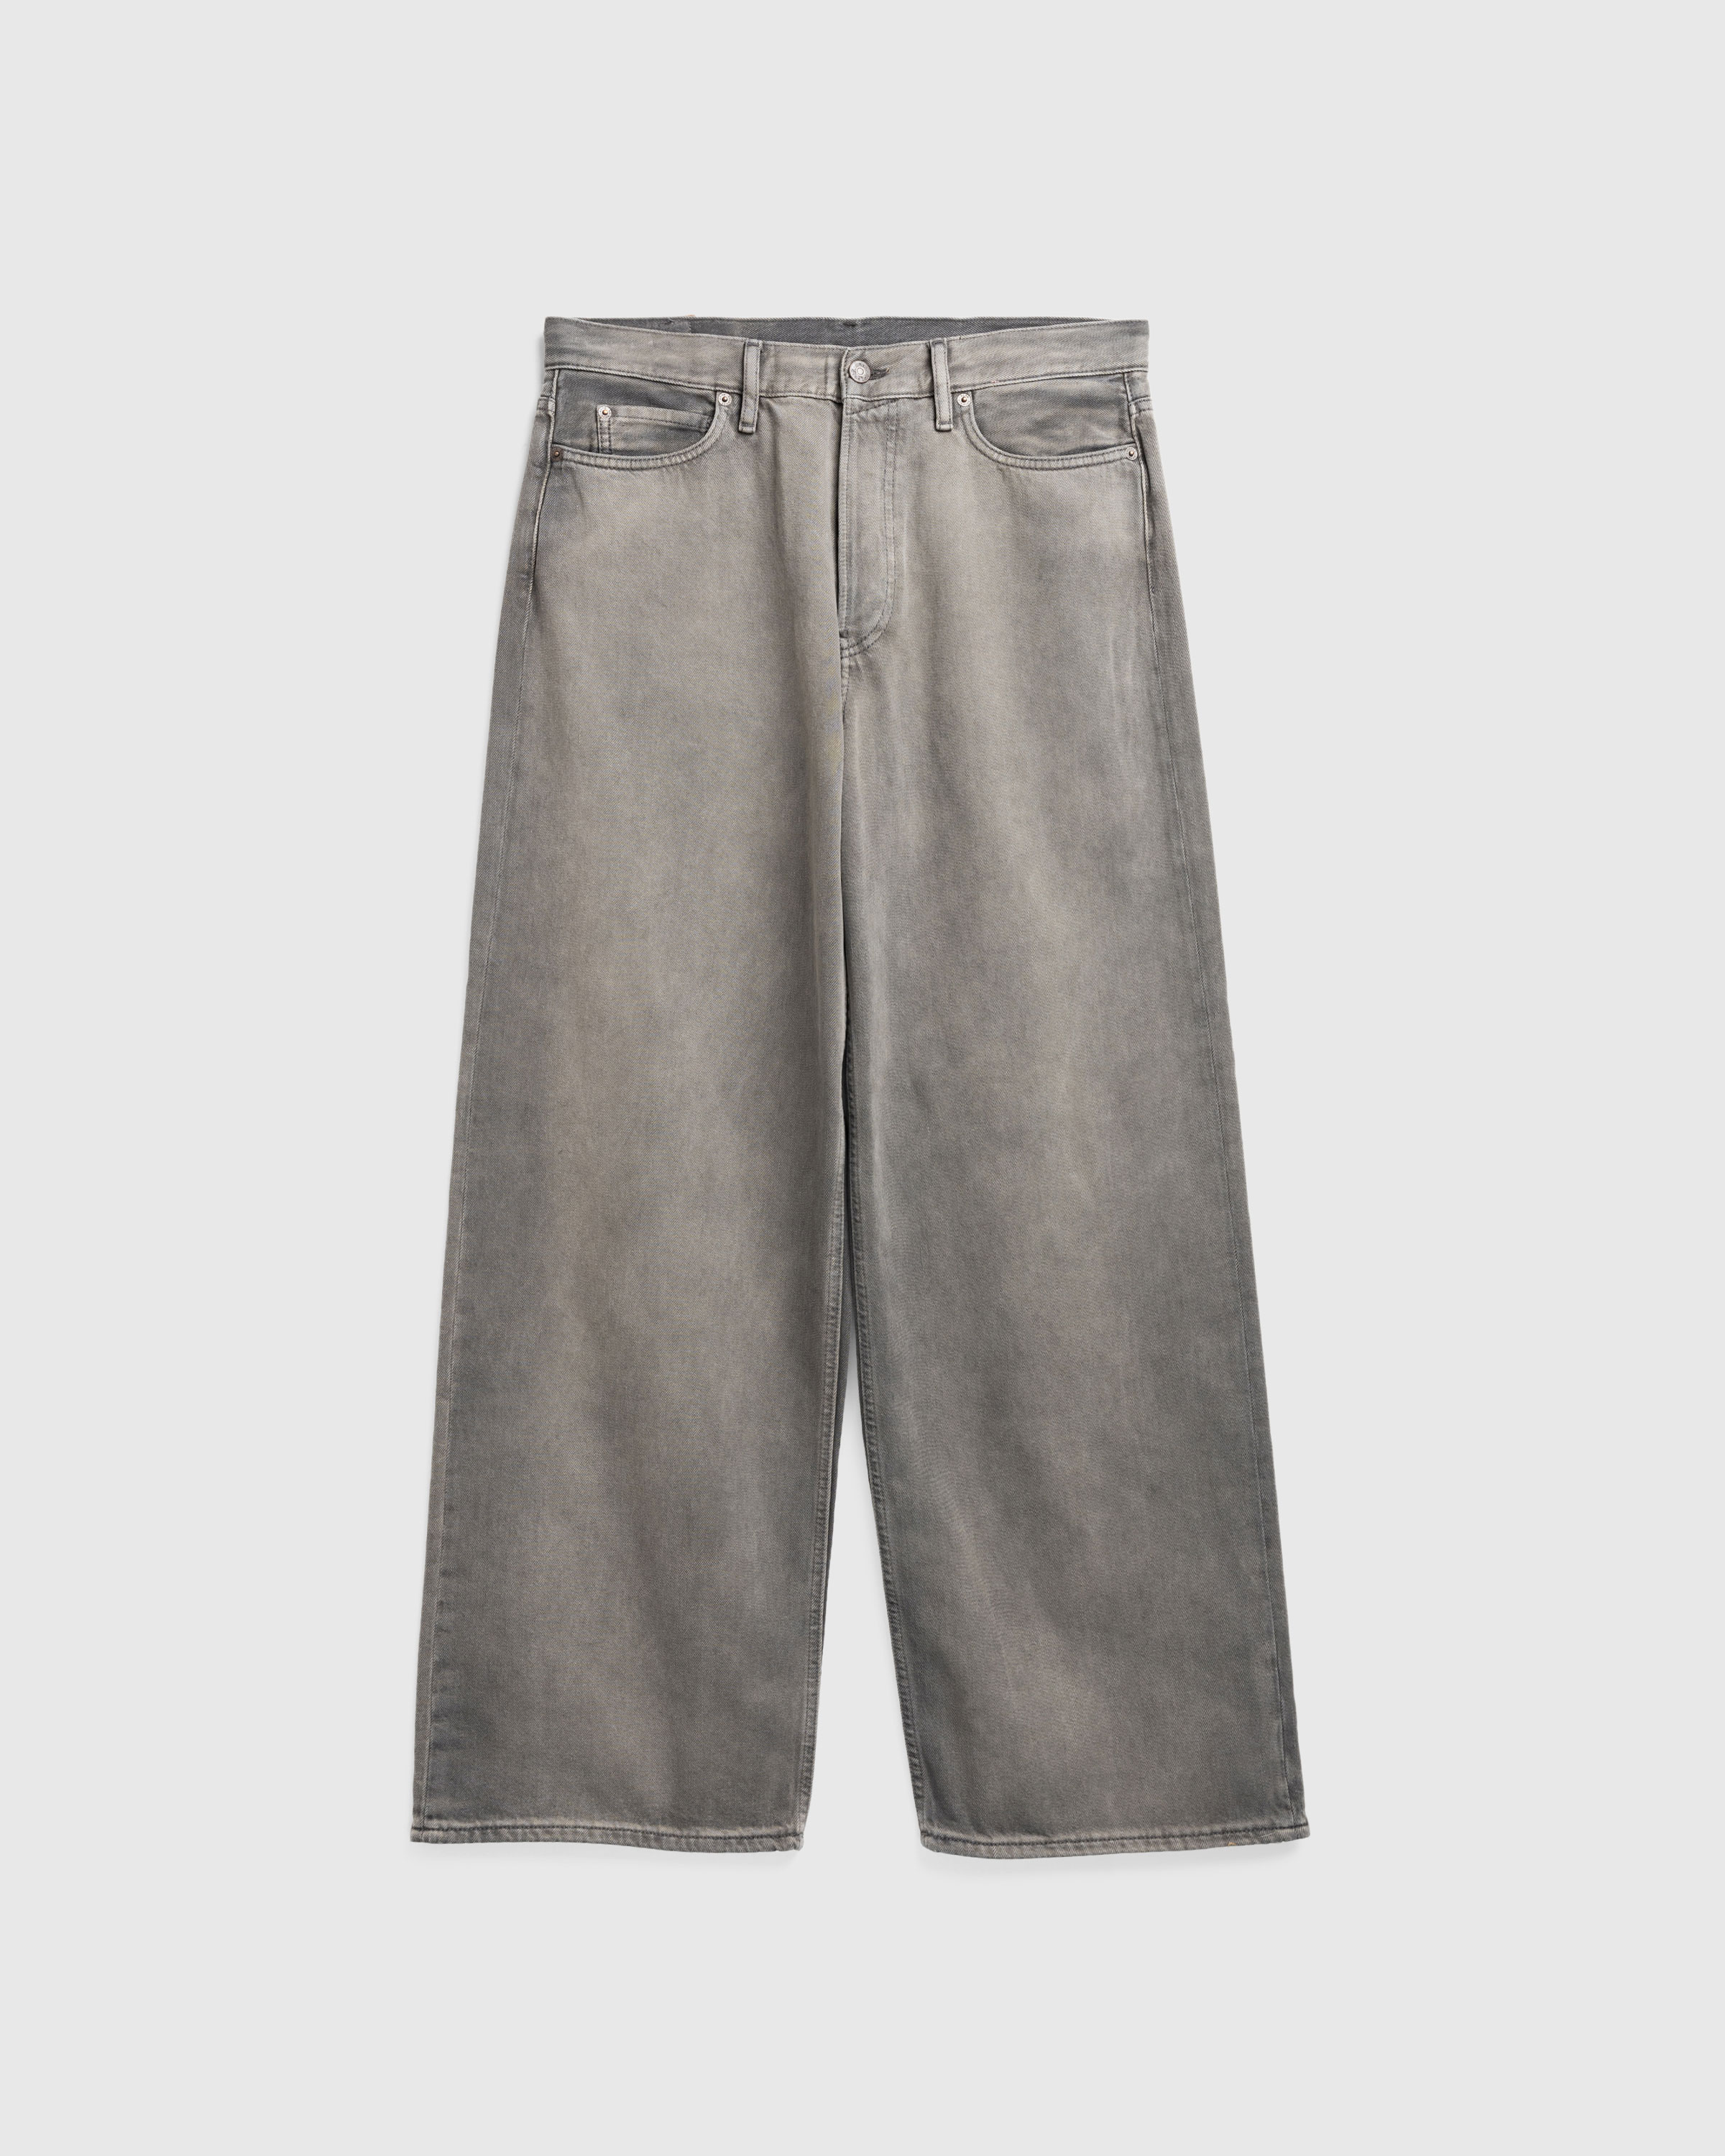 Acne Studios – Loose Fit Jeans 1981M Anthracite Grey - Pants - Grey - Image 1